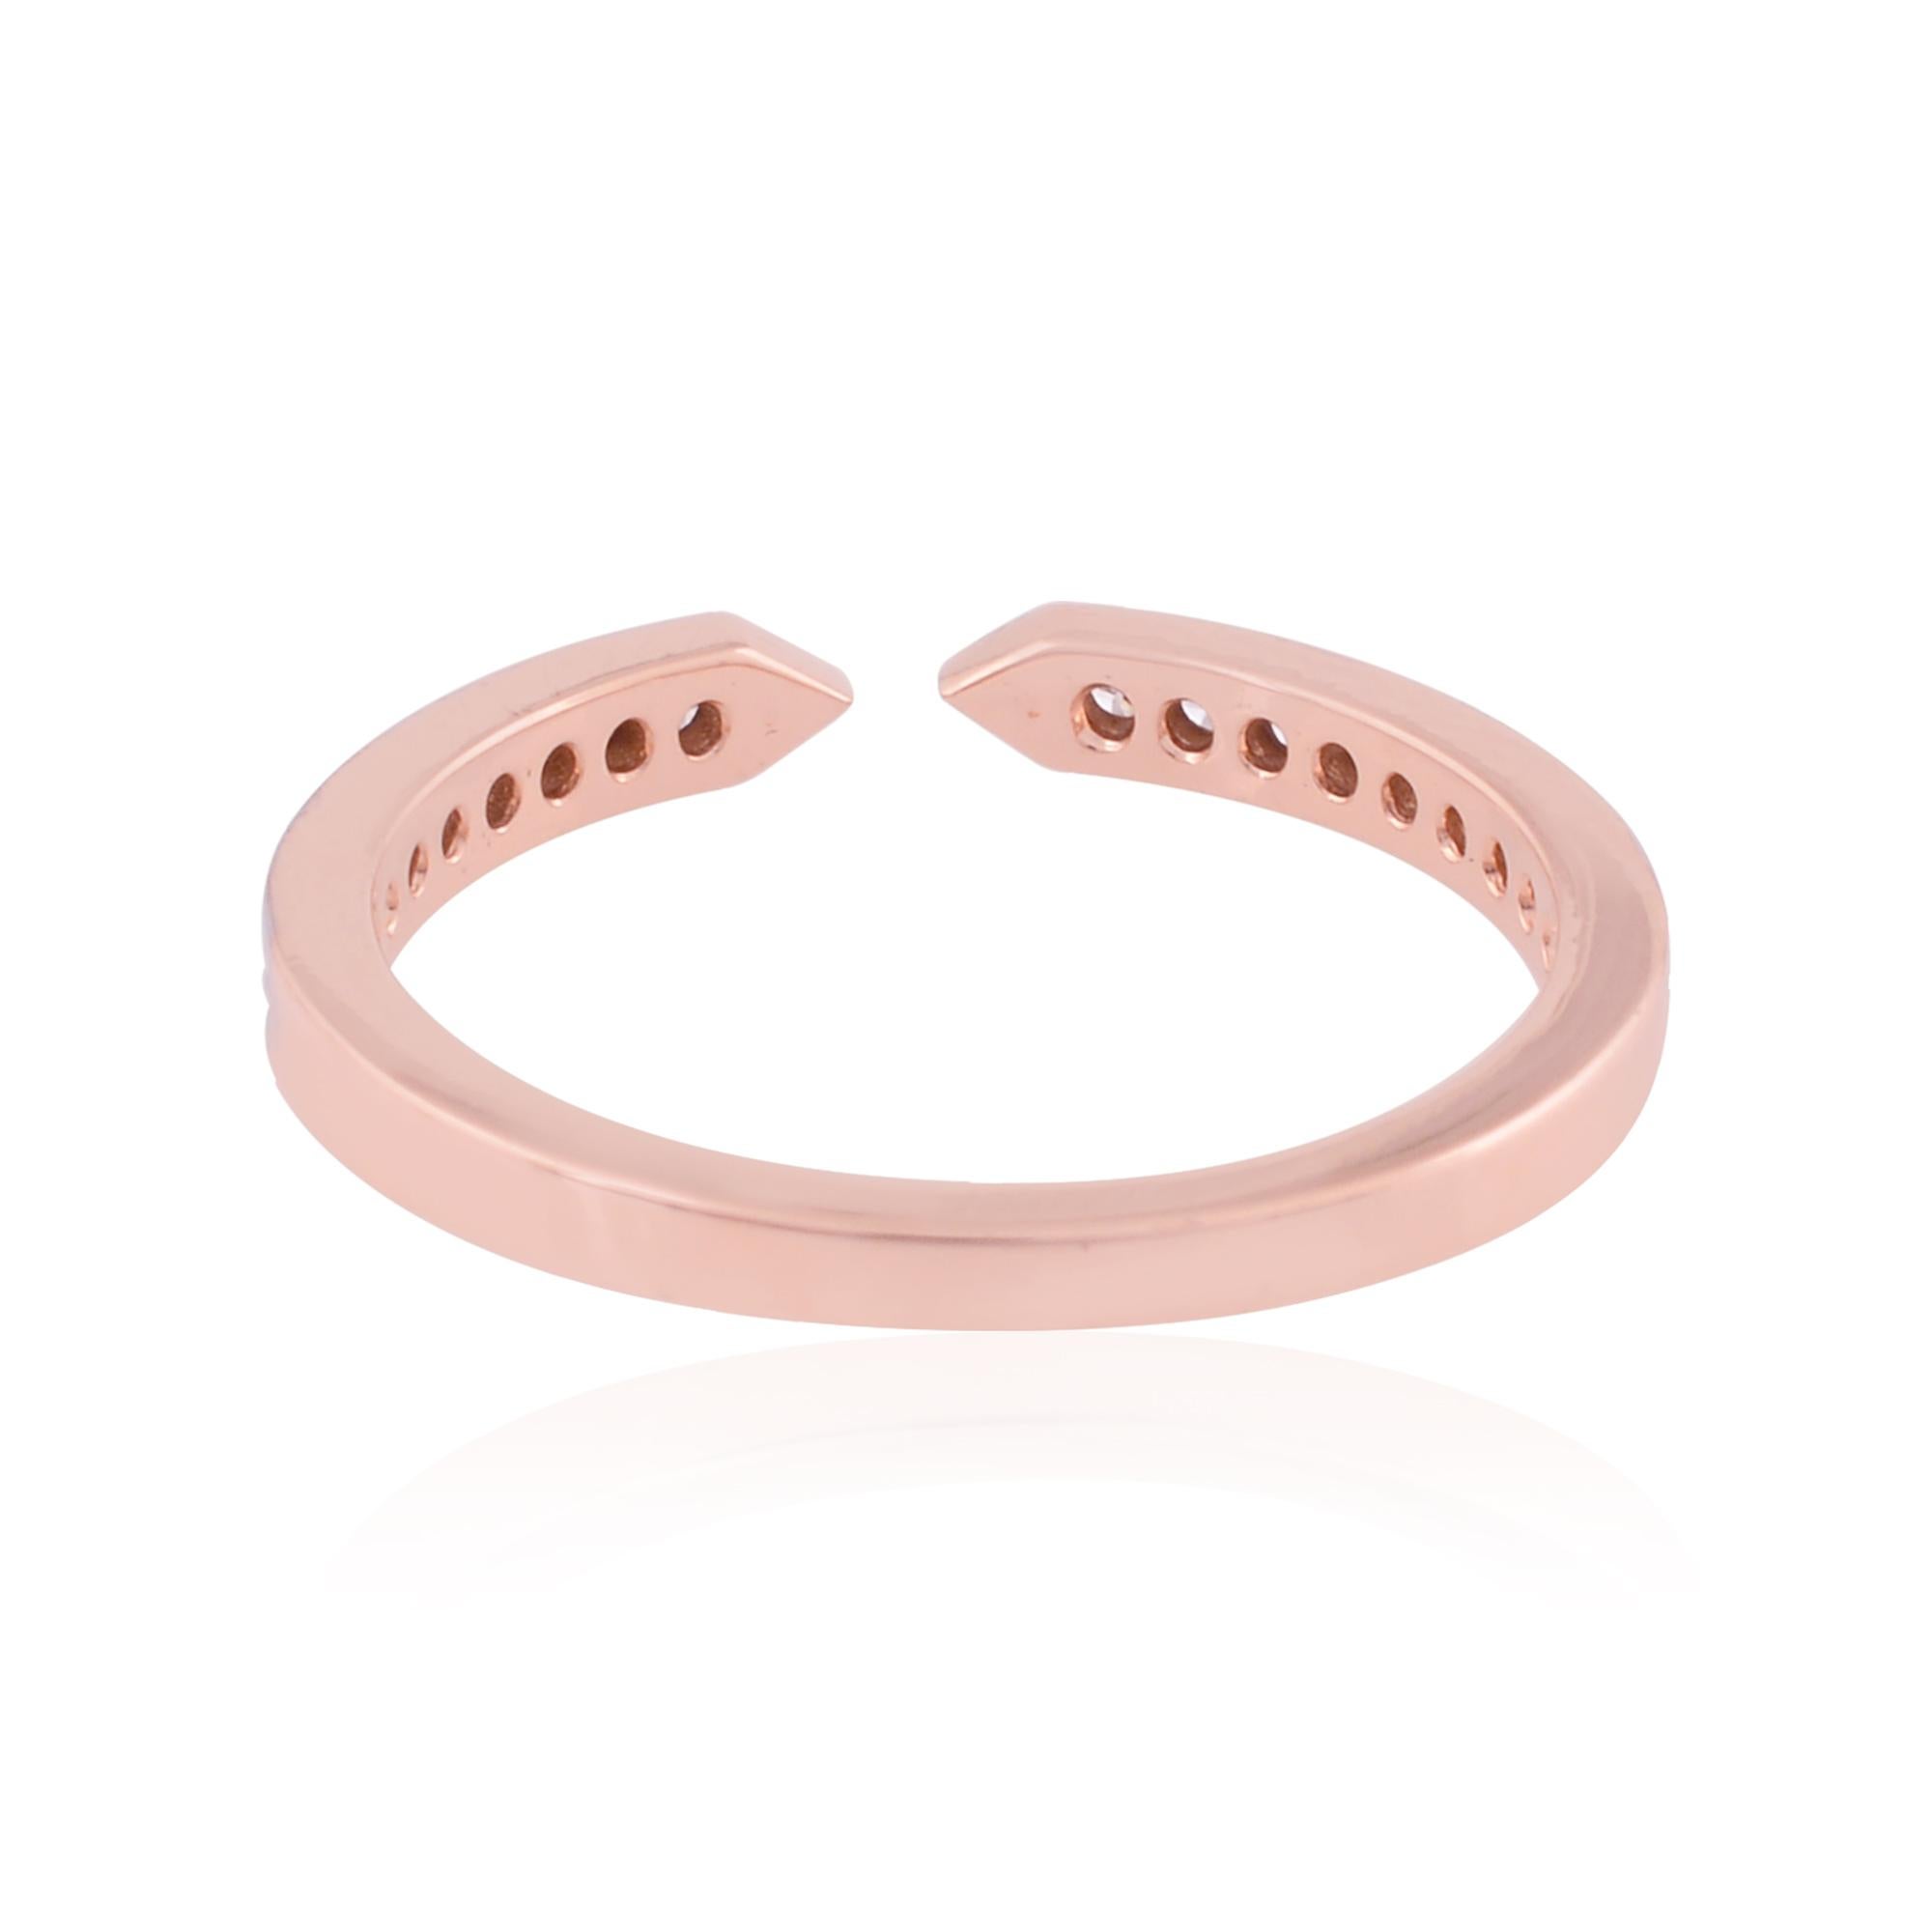 For Sale:  0.17 Carat SI Clarity HI Color Diamond Cuff Band Ring 18 Karat Rose Gold Jewelry 5